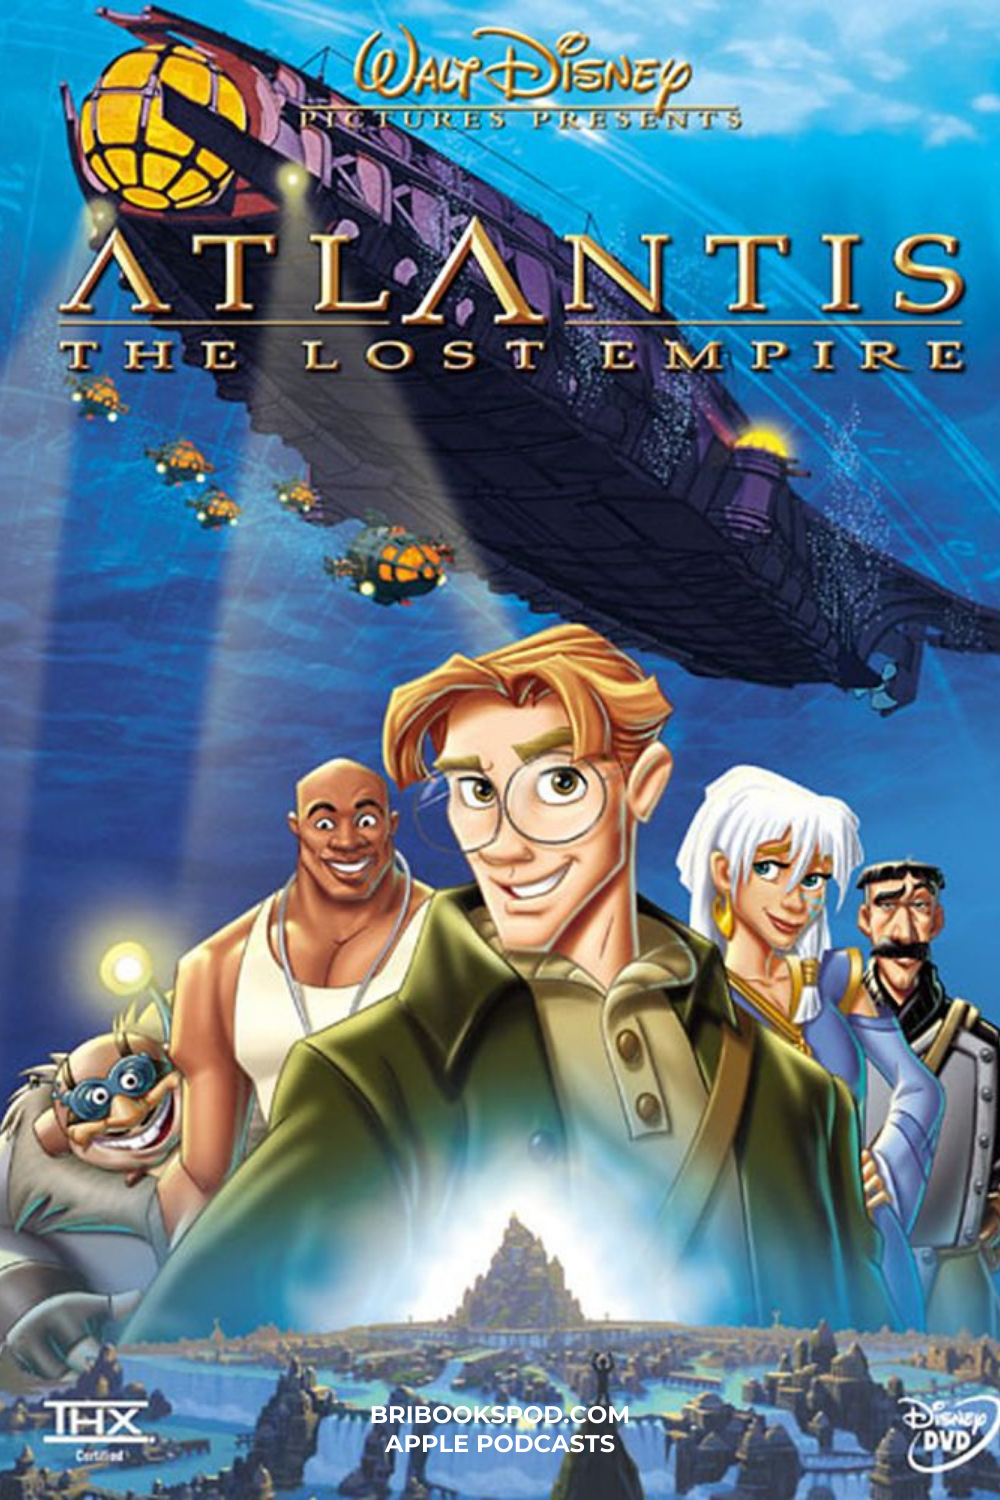 10 Best Movies to Watch Right Now: Atlantis The Lost Empire